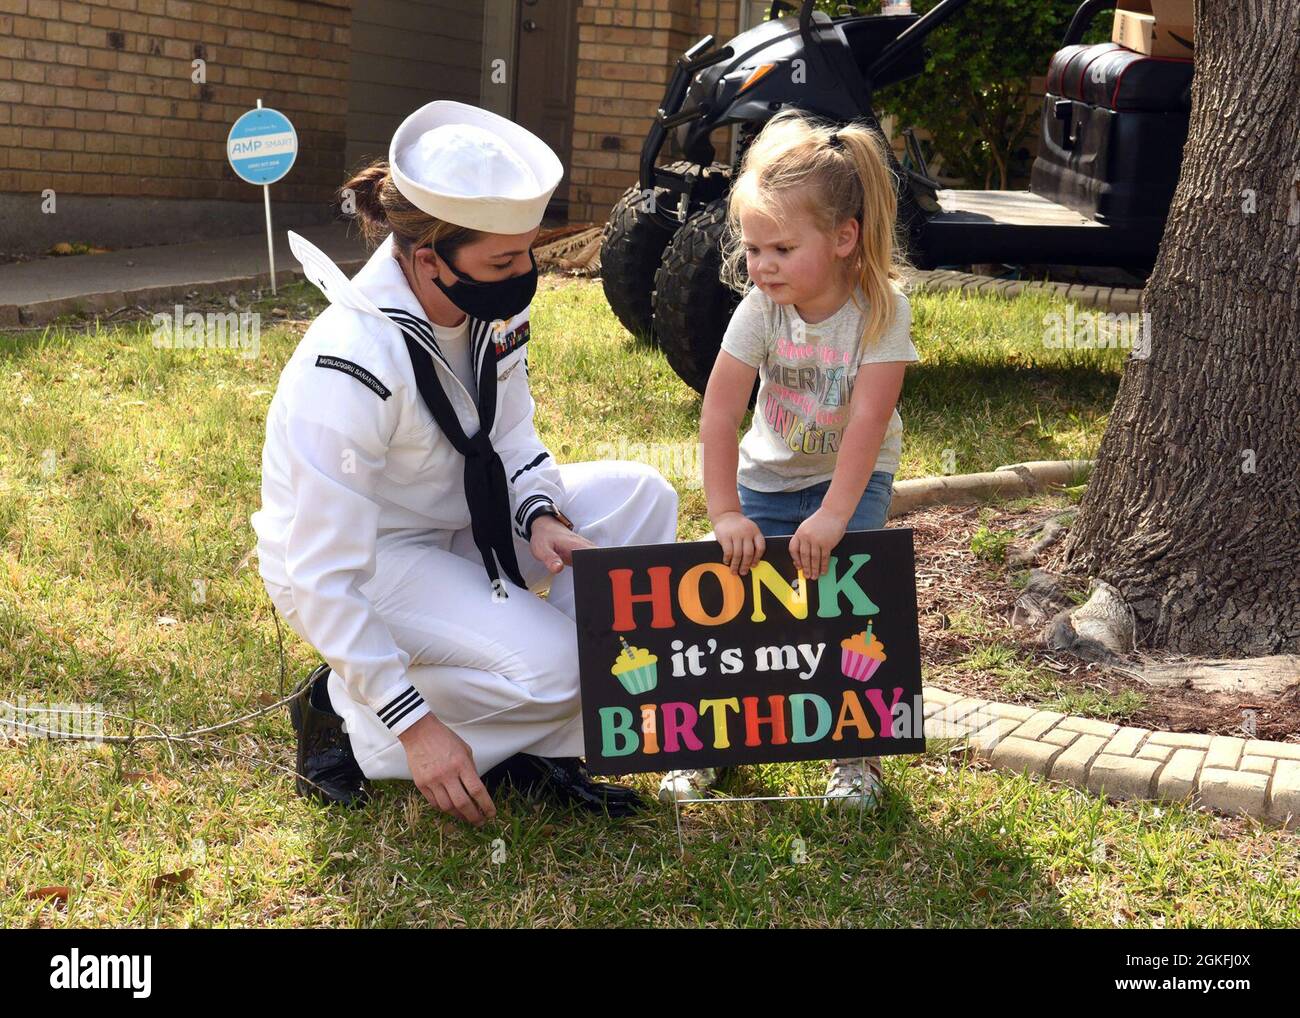 TEMPLE, Texas – (April 9, 2021) Naval Aircrewman (Helicopter) 2nd Class Katherine Knox, of Copperas Cove, Texas, the leading petty officer assigned to Navy Recruiting Station (NRS) Temple, Talent Acquisition Onboarding Center (TAOC) Capital City, joined by her daughter, Blake, prepares to honor retired Chief Petty Officer Joseph New on his 90th birthday held at his home.  New, a native of Troy, S.C., was raised in Washington, D.C., and joined the Navy in 1952 serving for 20 years as a ship’s serviceman. He served on numerous ships to include the aircraft carrier, USS Independence (CV-62) which Stock Photo